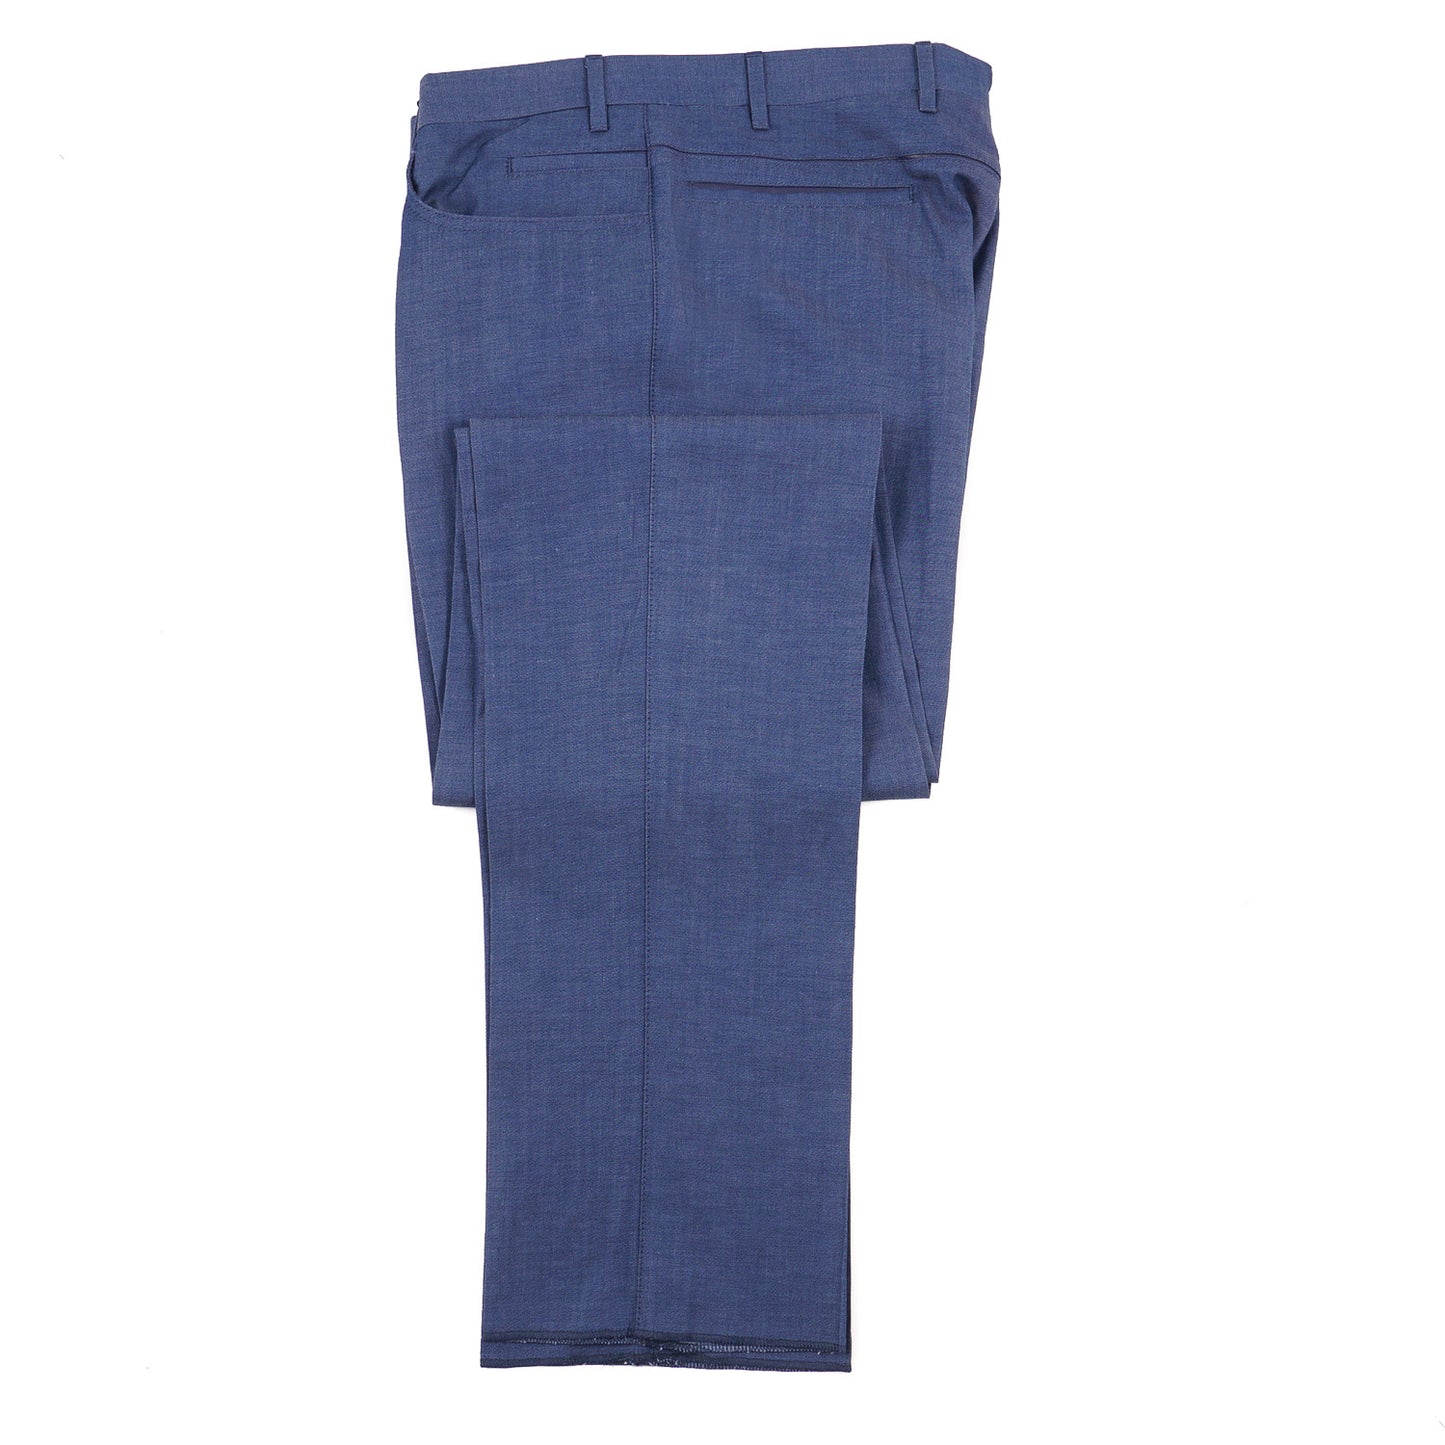 Zilli Wool and Linen Pants with Leather Details - Top Shelf Apparel